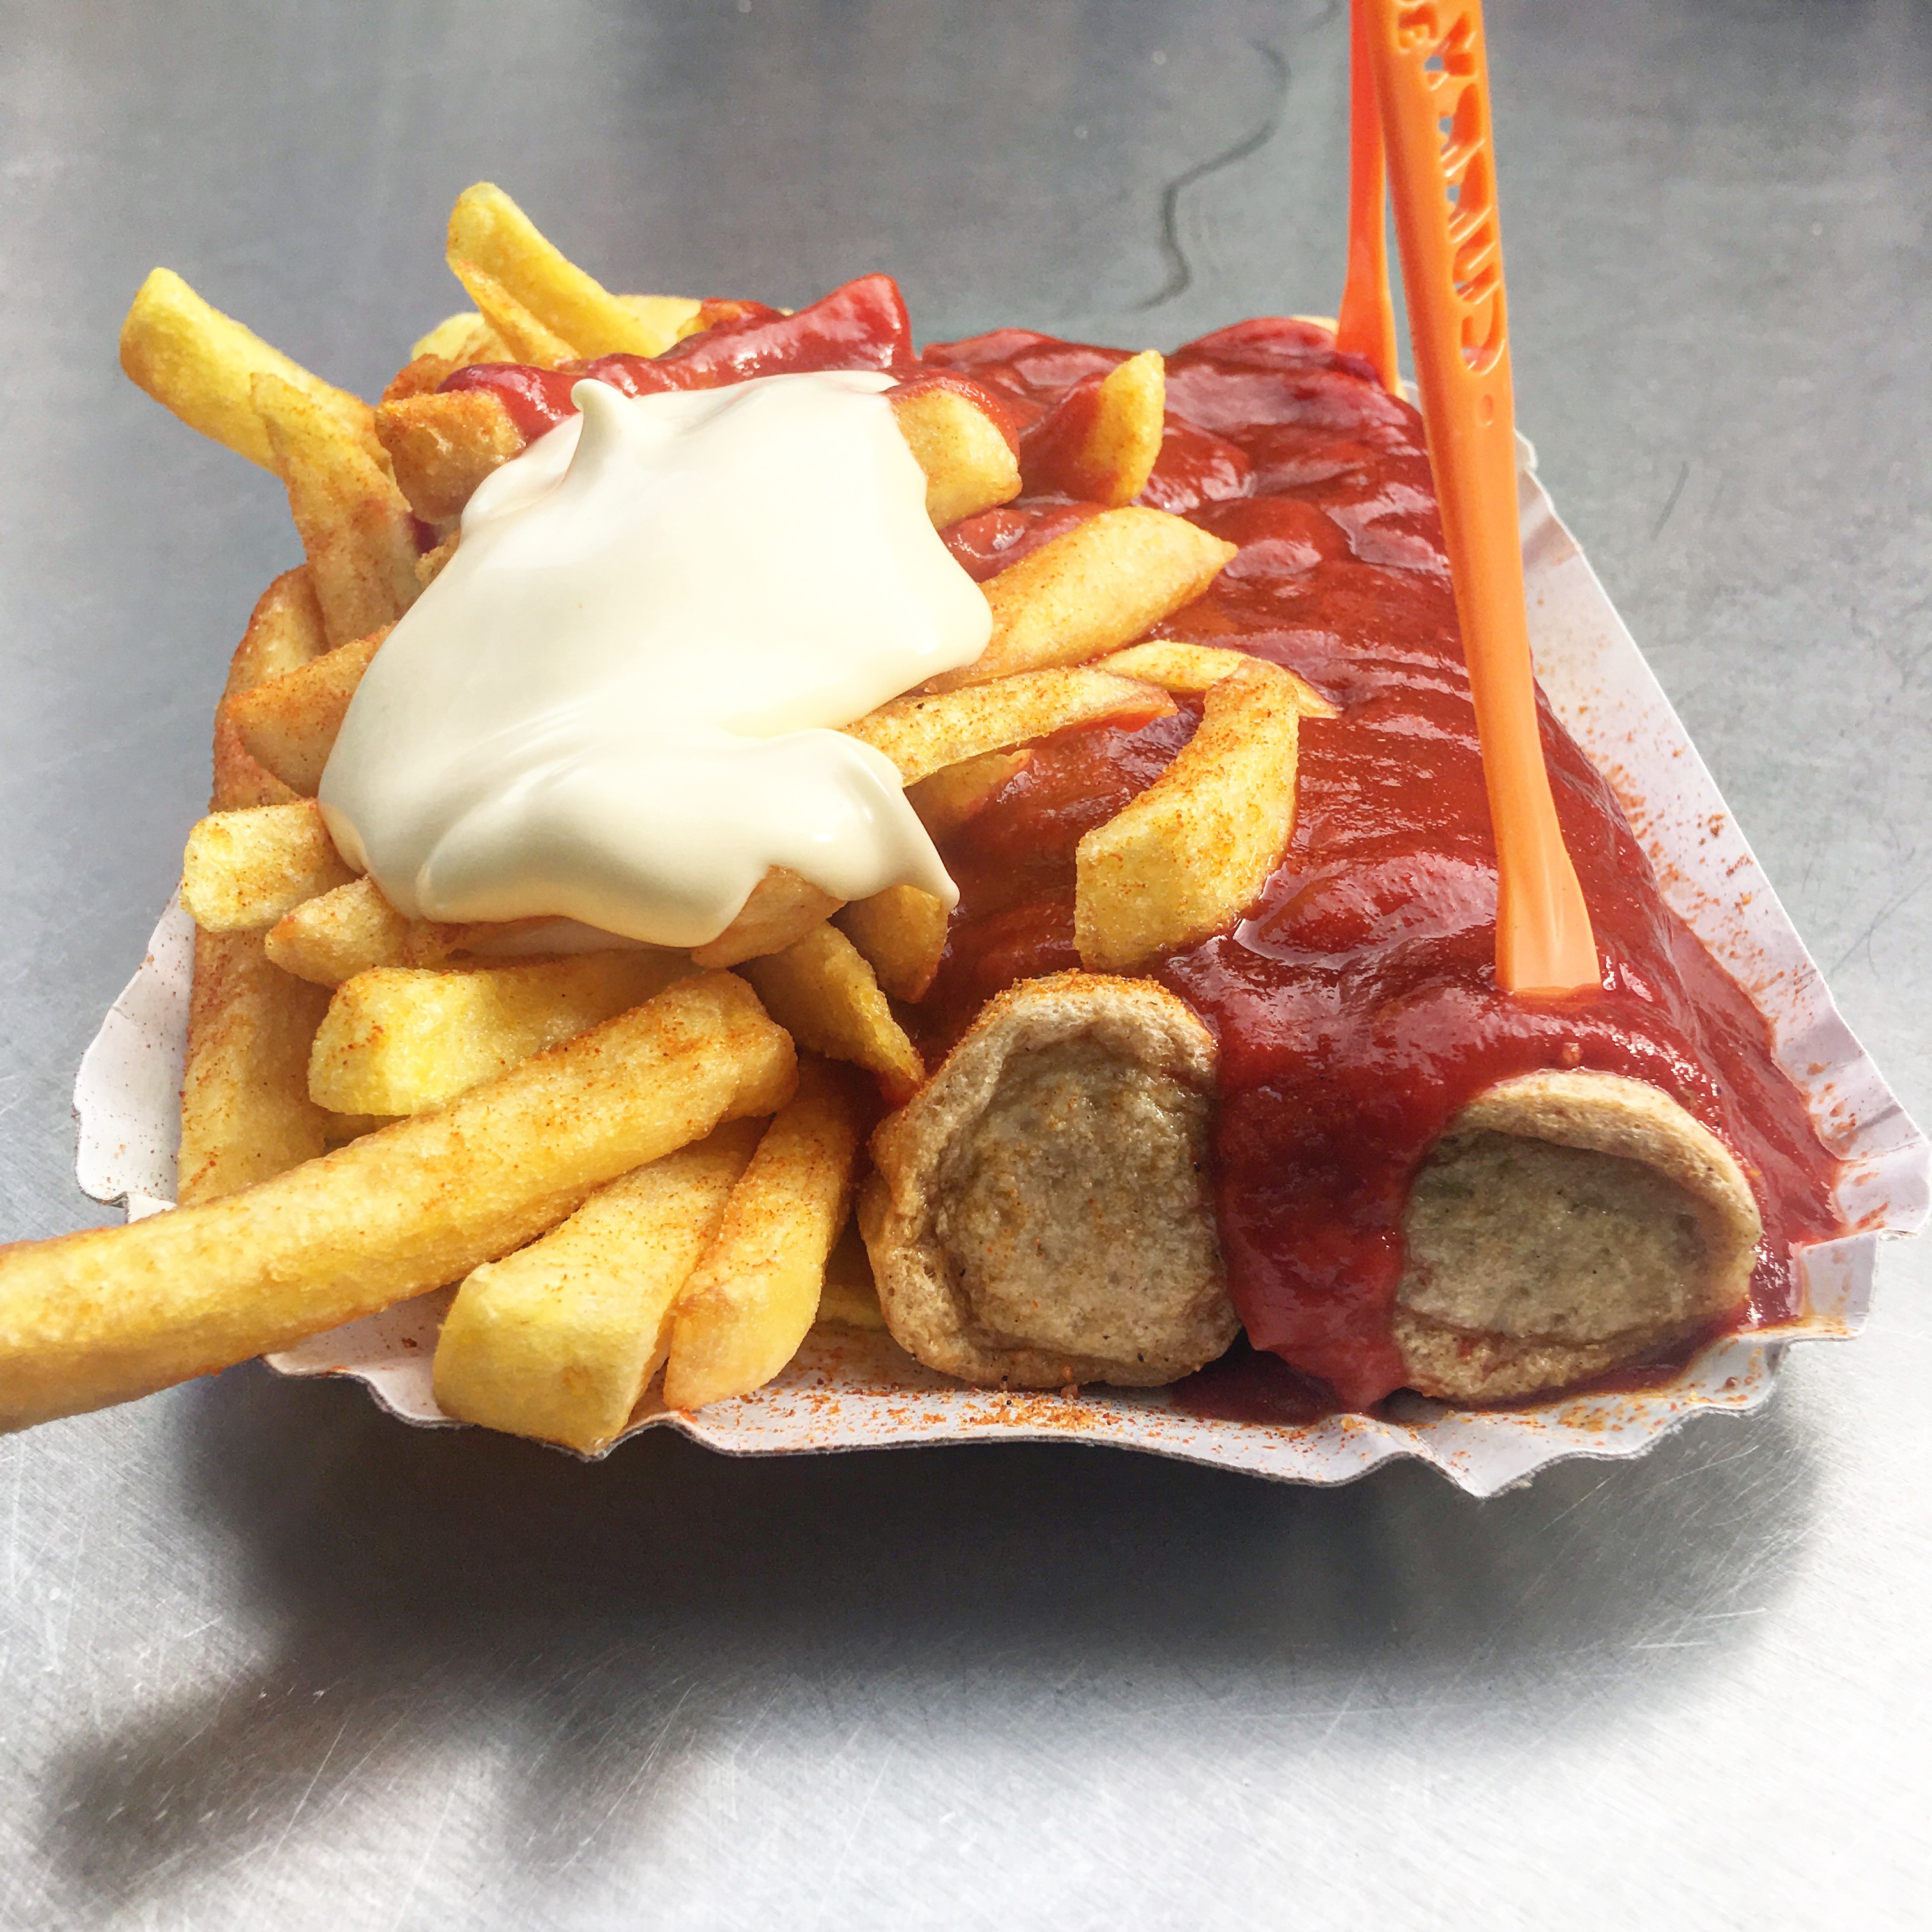 Currywurst at Curry 36 in Berlin Germany